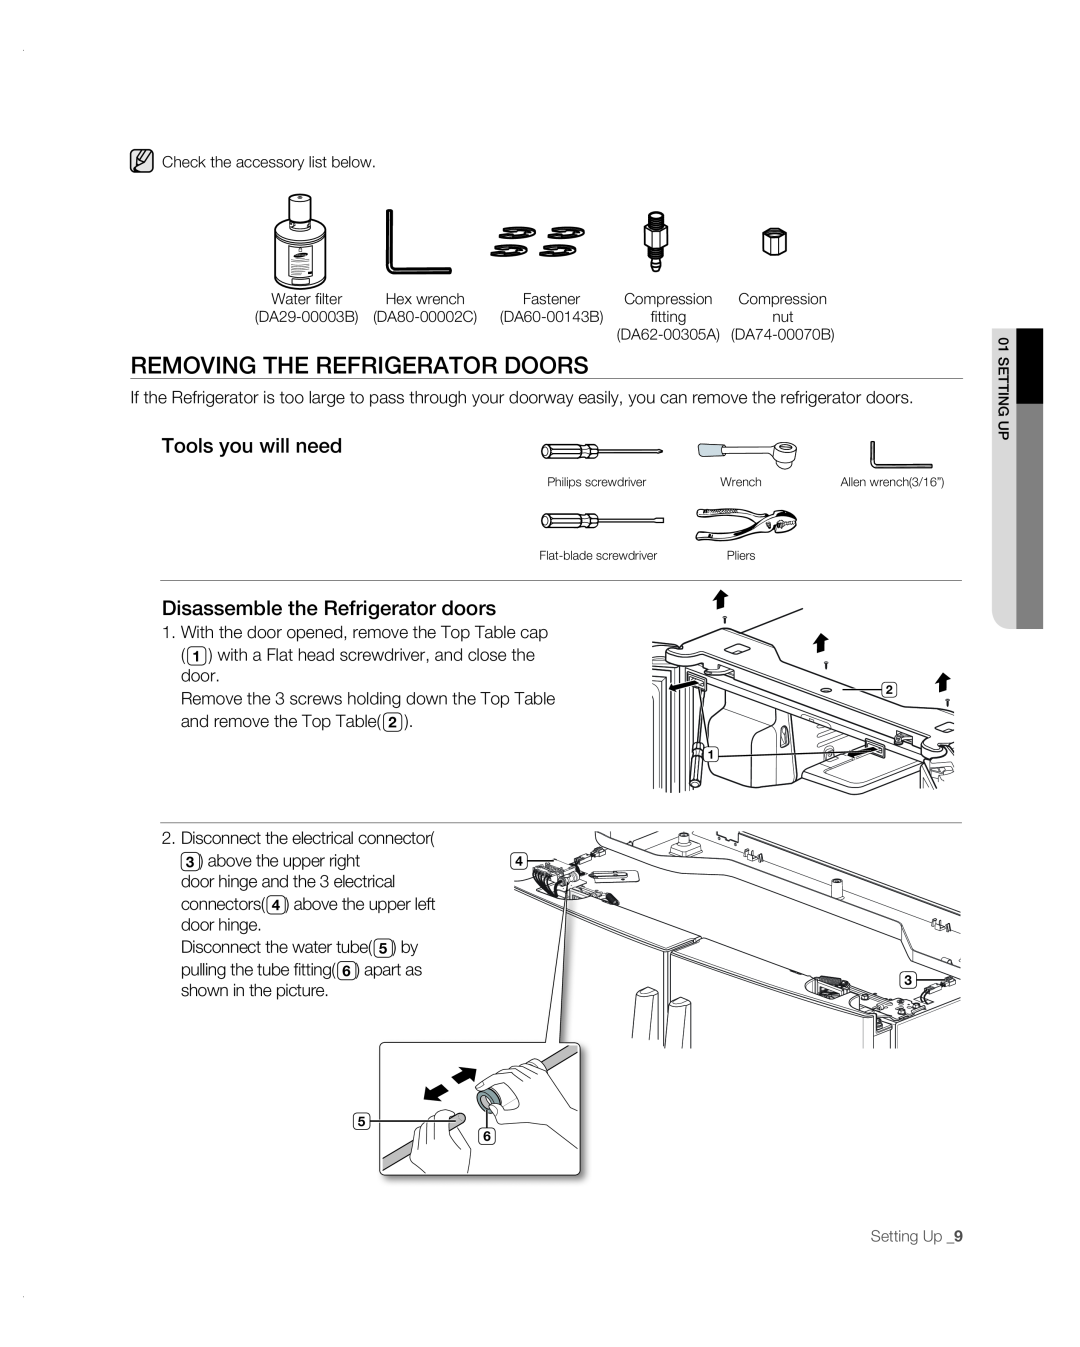 Samsung RF267AB user manual Removing the refrigerator doors, Tools you will need, Disassemble the Refrigerator doors 